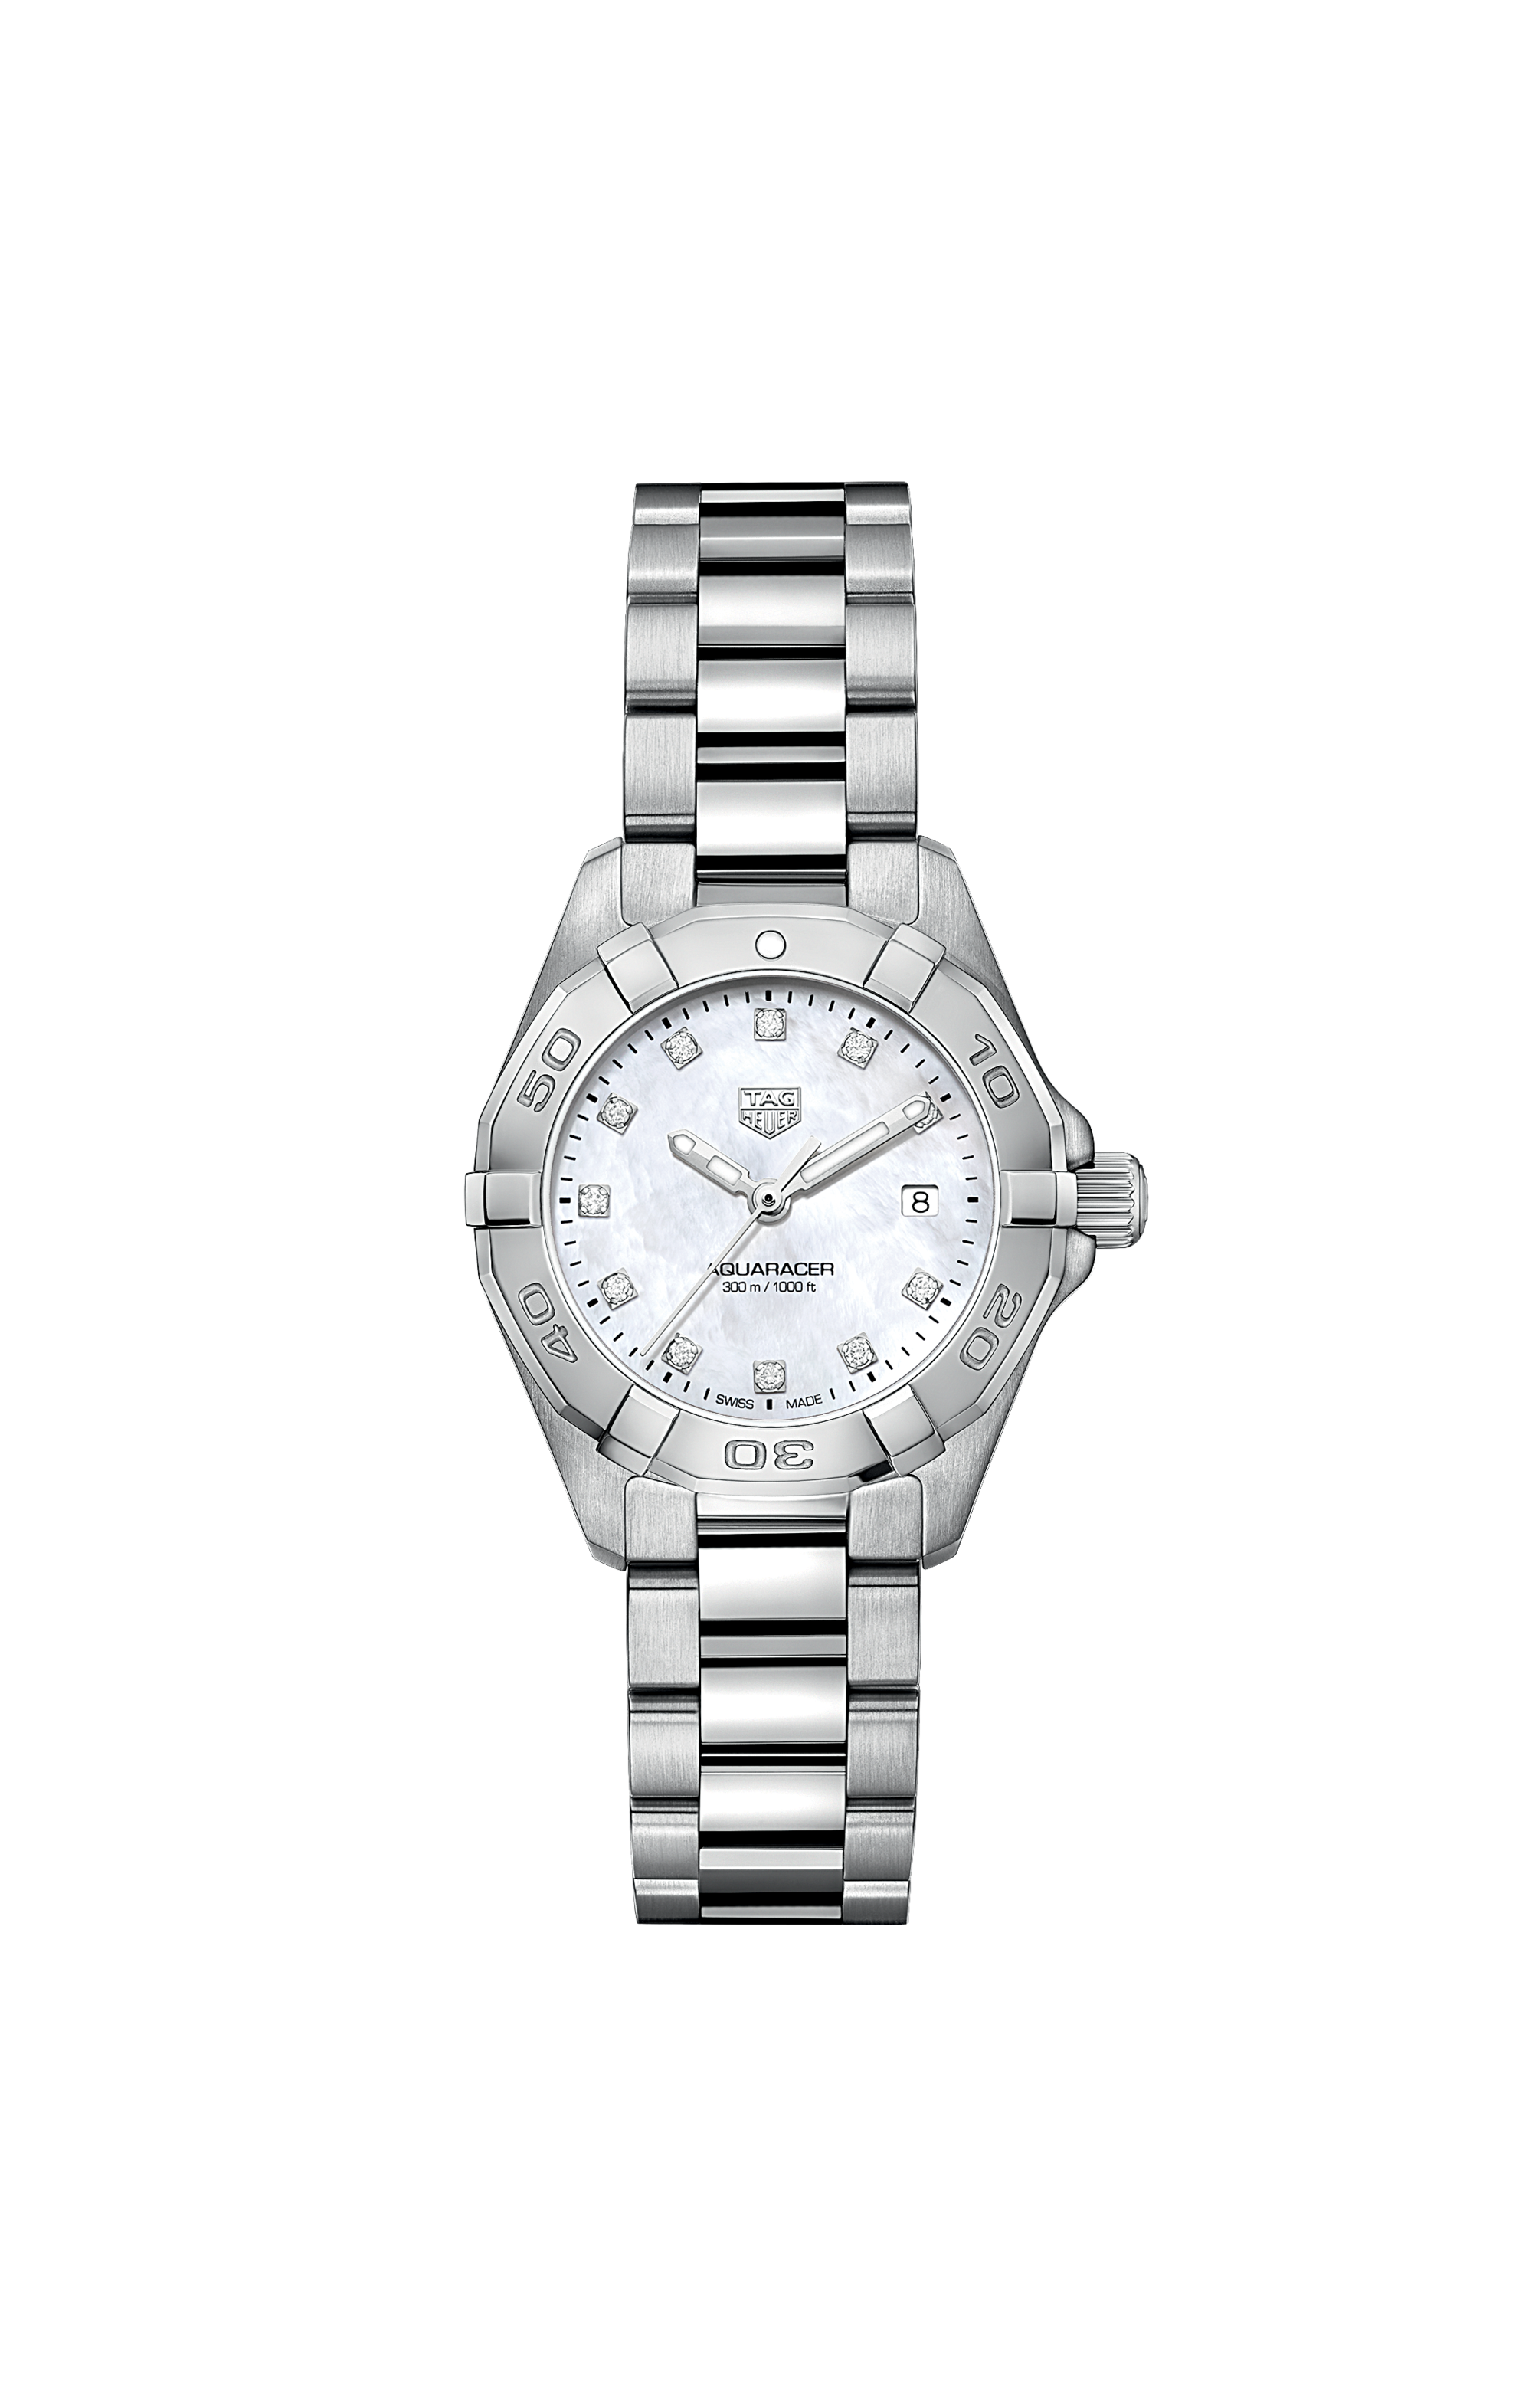 TAG Heuer TAG Heuer WK1112-0 Professional Watch Stainless Steel / SS Men'sTAG Heuer Tag Heuer WK1116-0 Professional Watch Stainless Steel / SS Men's